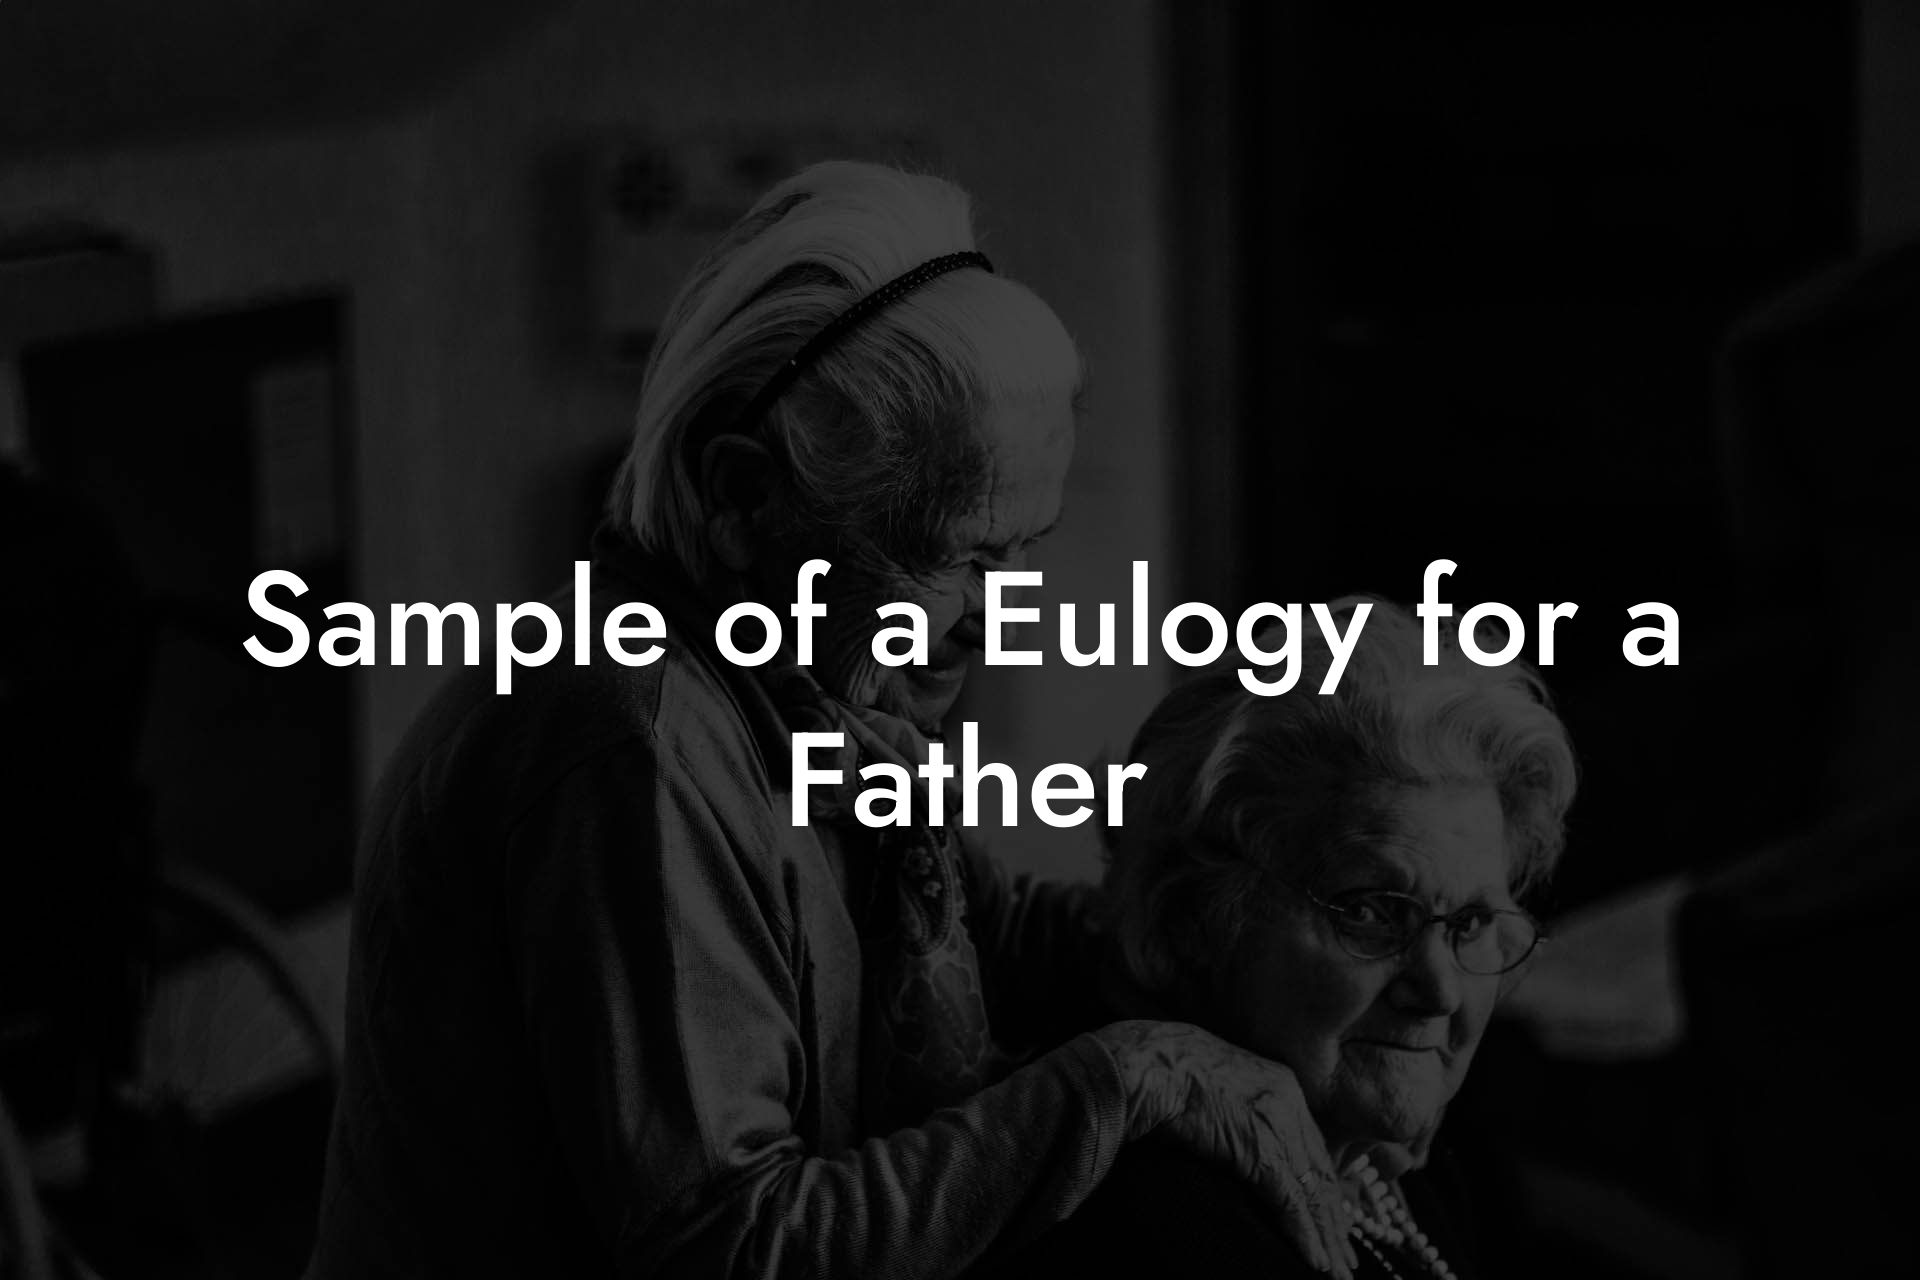 Sample of a Eulogy for a Father